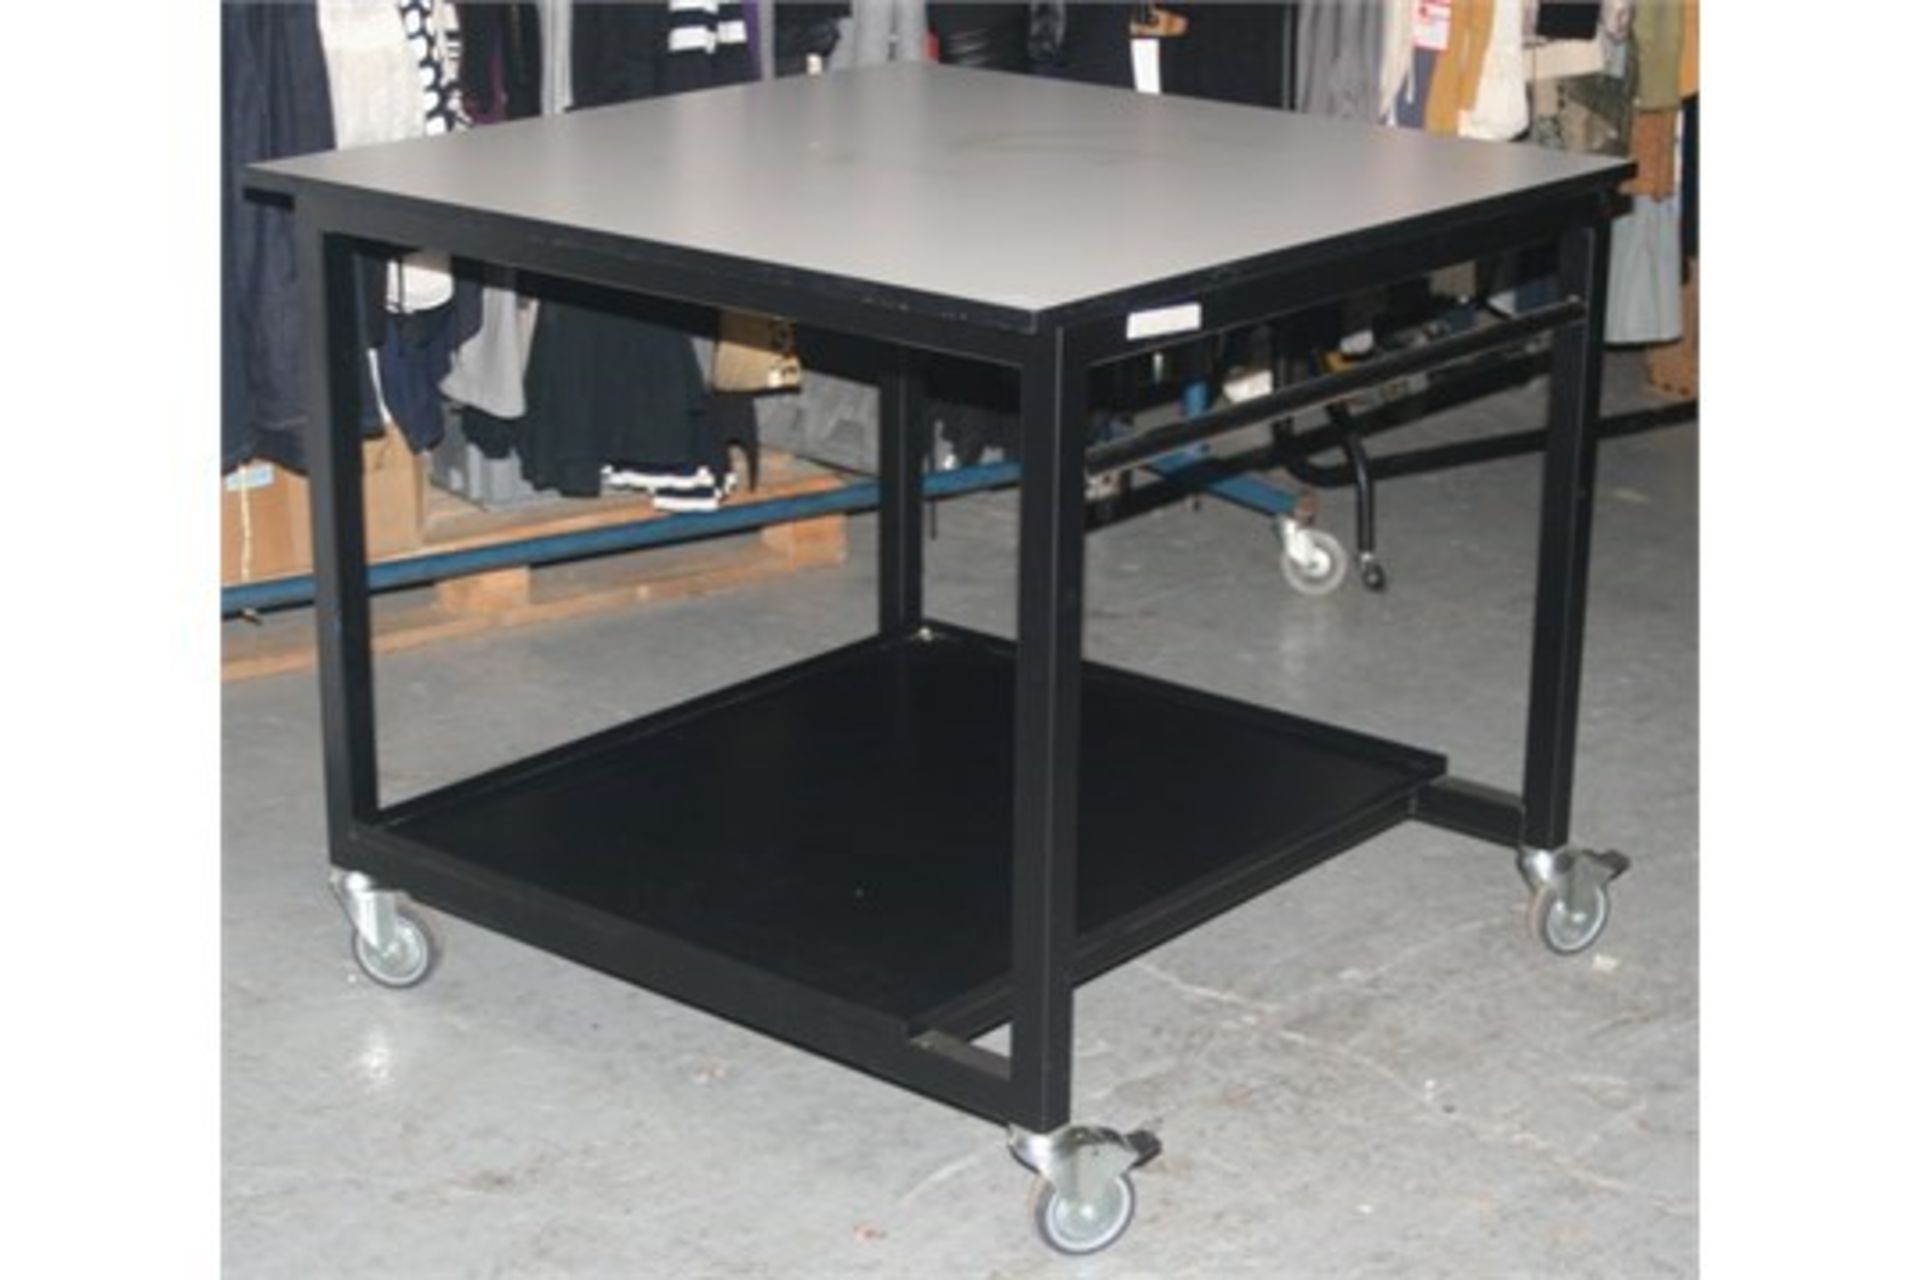 1 x Mobile Work Table - Large Size With Undershelf and Heavy Duty Castor Wheels - Strong Build